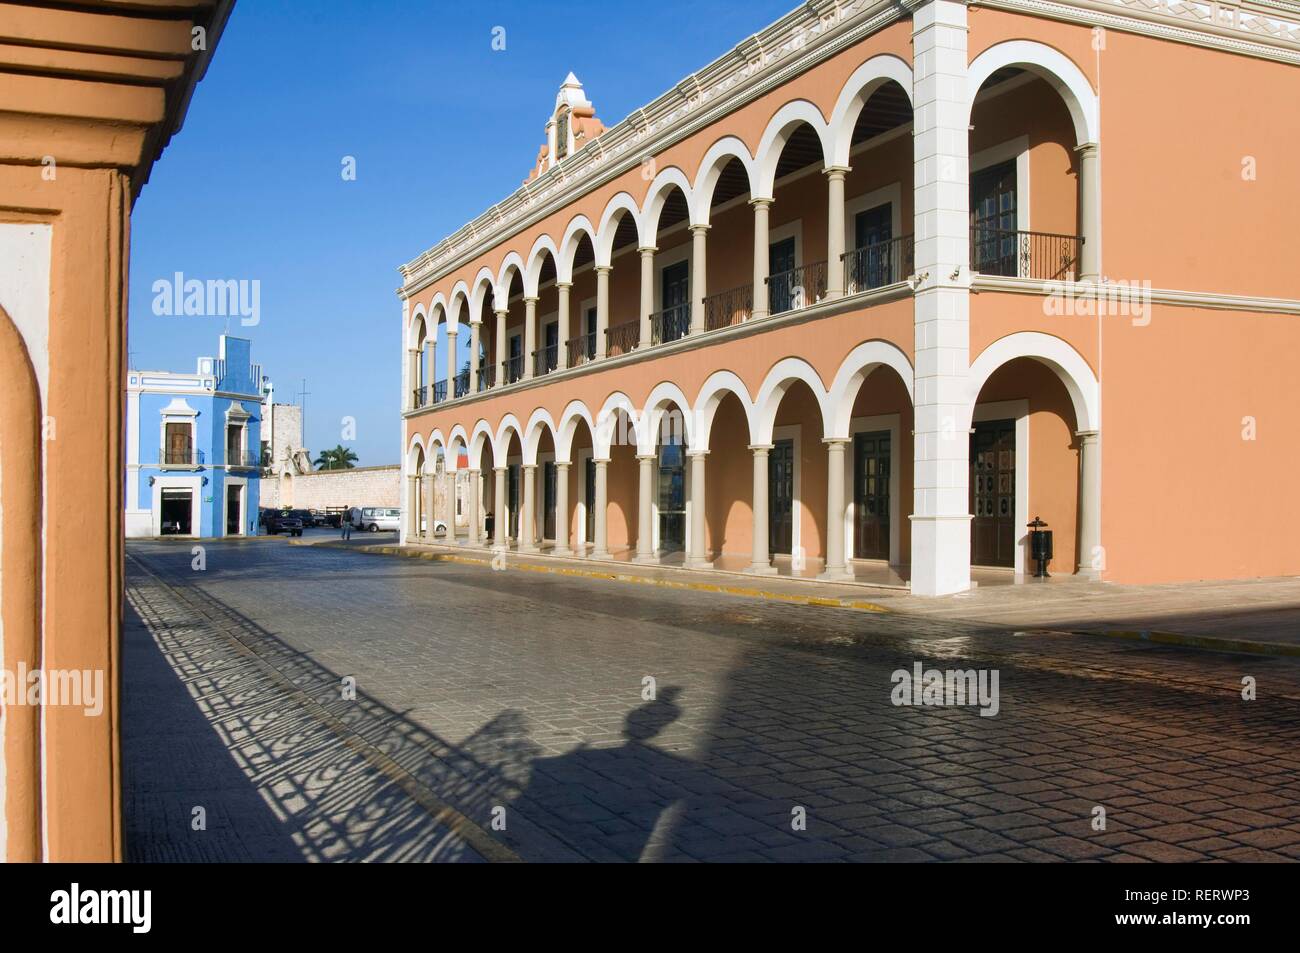 Colonnades of a house, historic town of Campeche, UNESCO World Heritage Site, Province of Campeche, Yucatan peninsula, Mexico Stock Photo